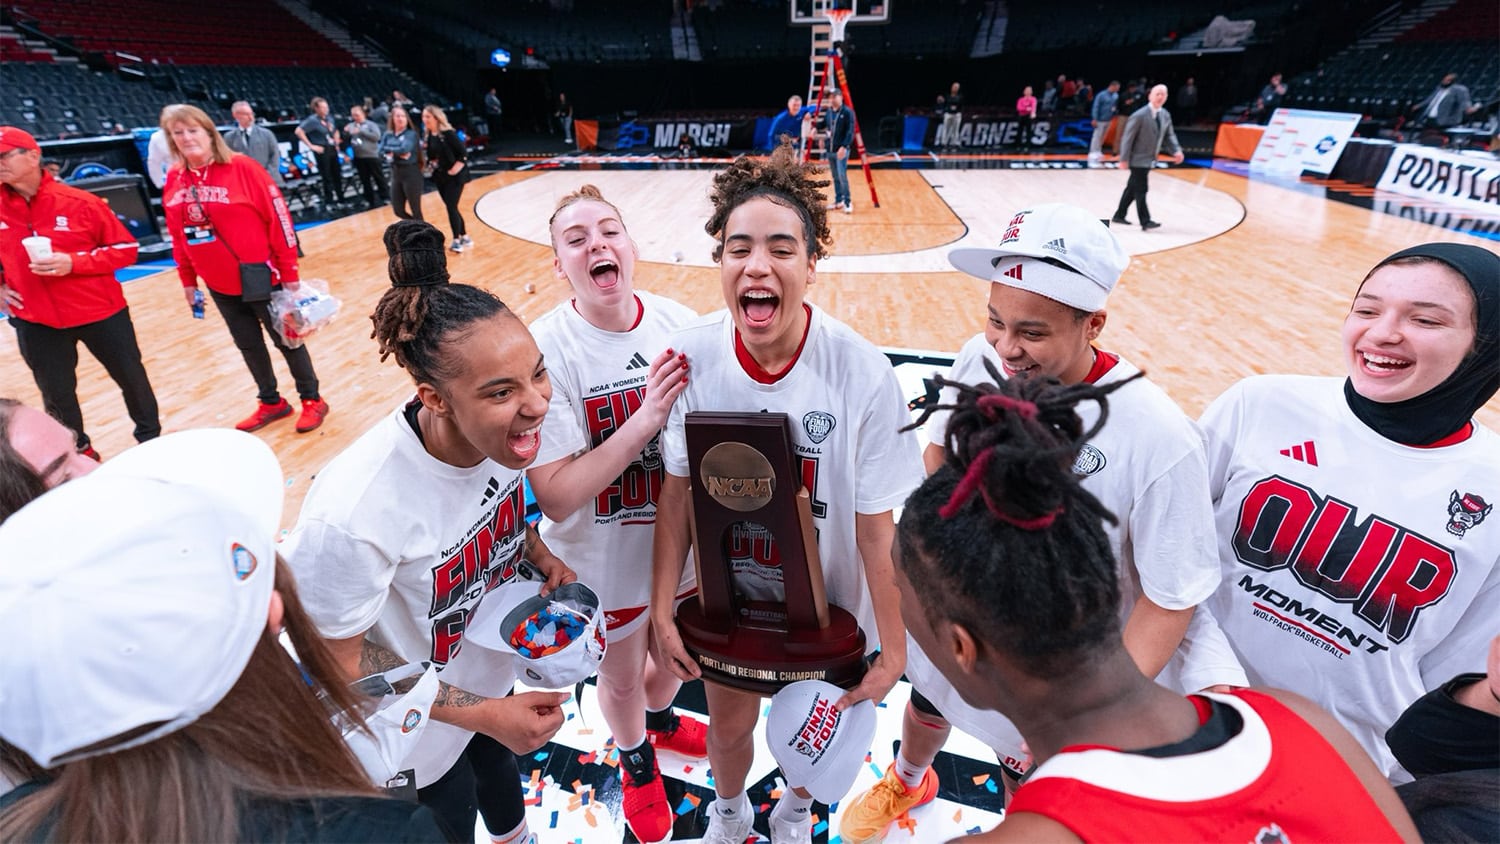 NC State Women's Basketball players celebrate on the court with their trophy after winning their game to advance to the Final Four